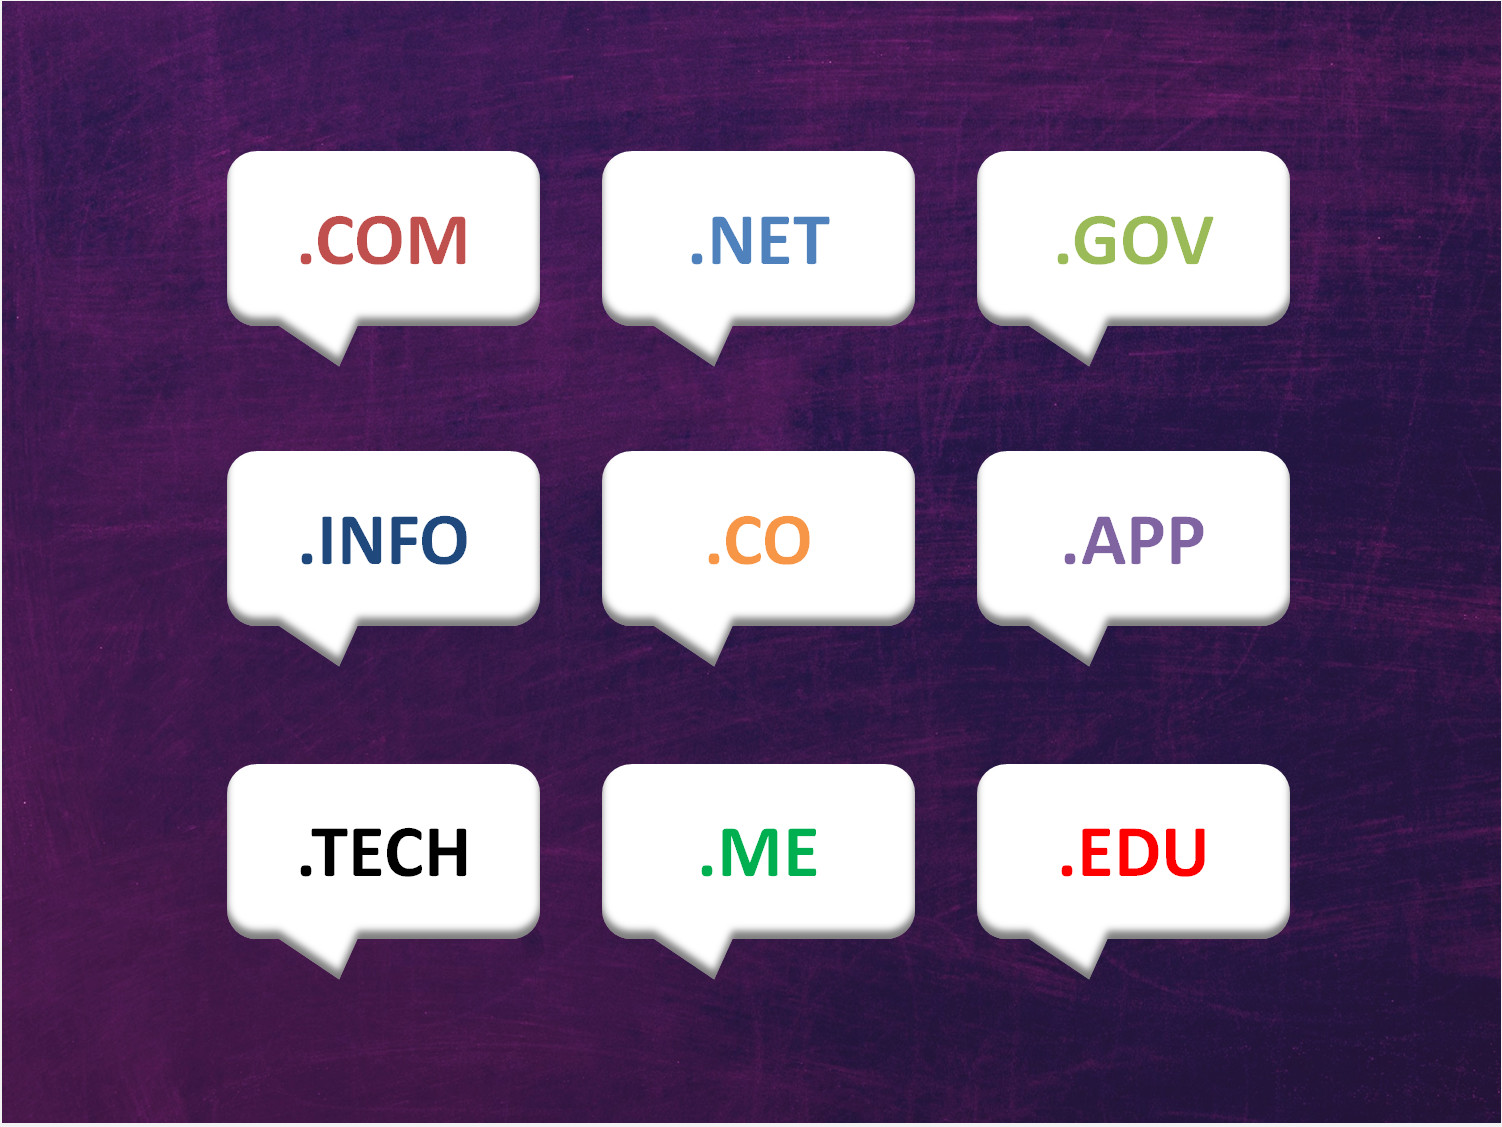 List of top level domains (TLD’s)